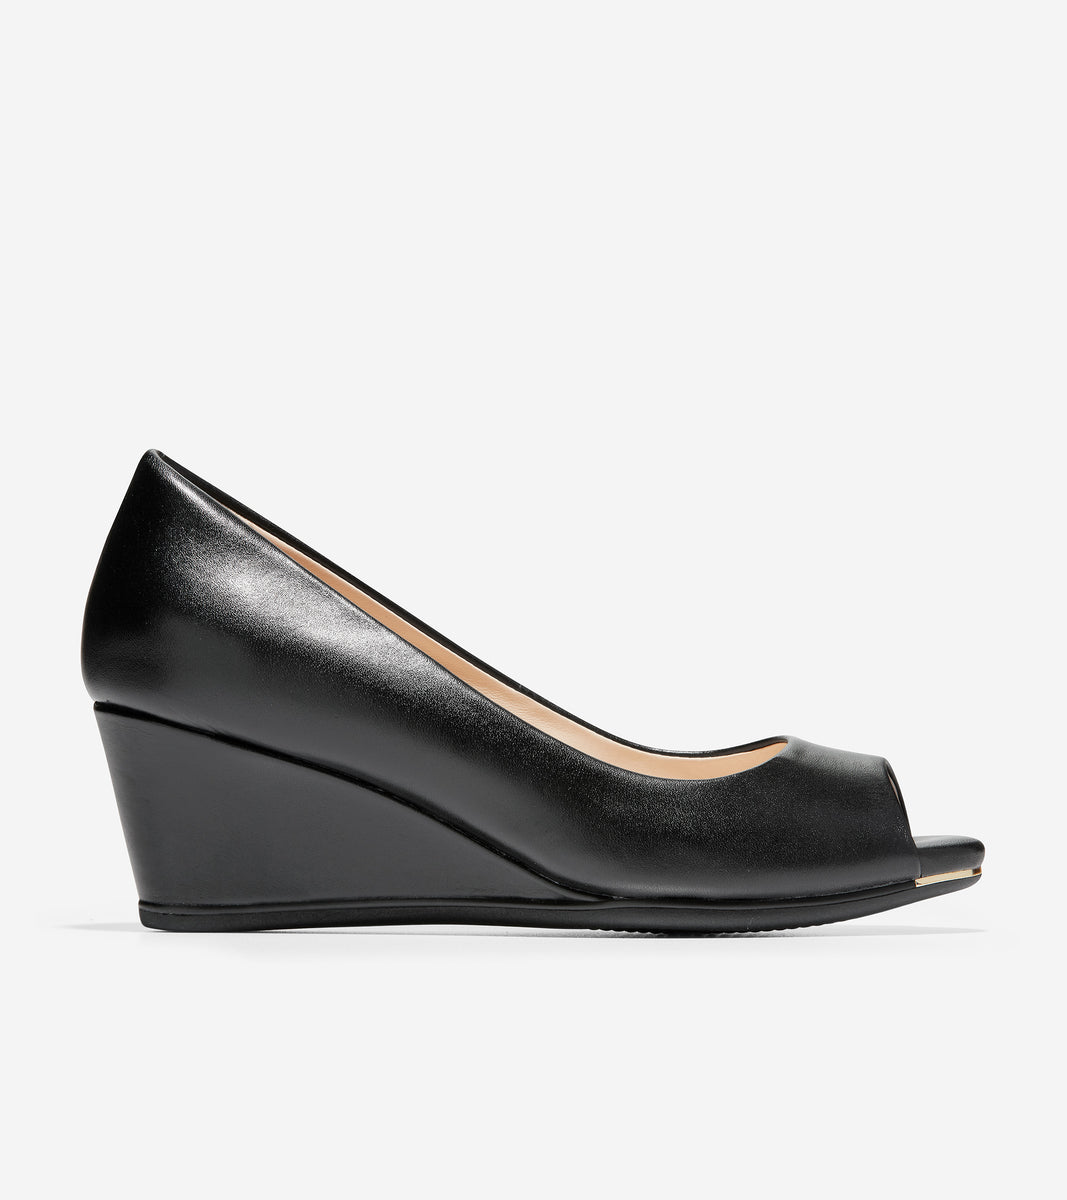 ColeHaan-Grand Ambition Open Toe Wedge-w16906-Black Leather